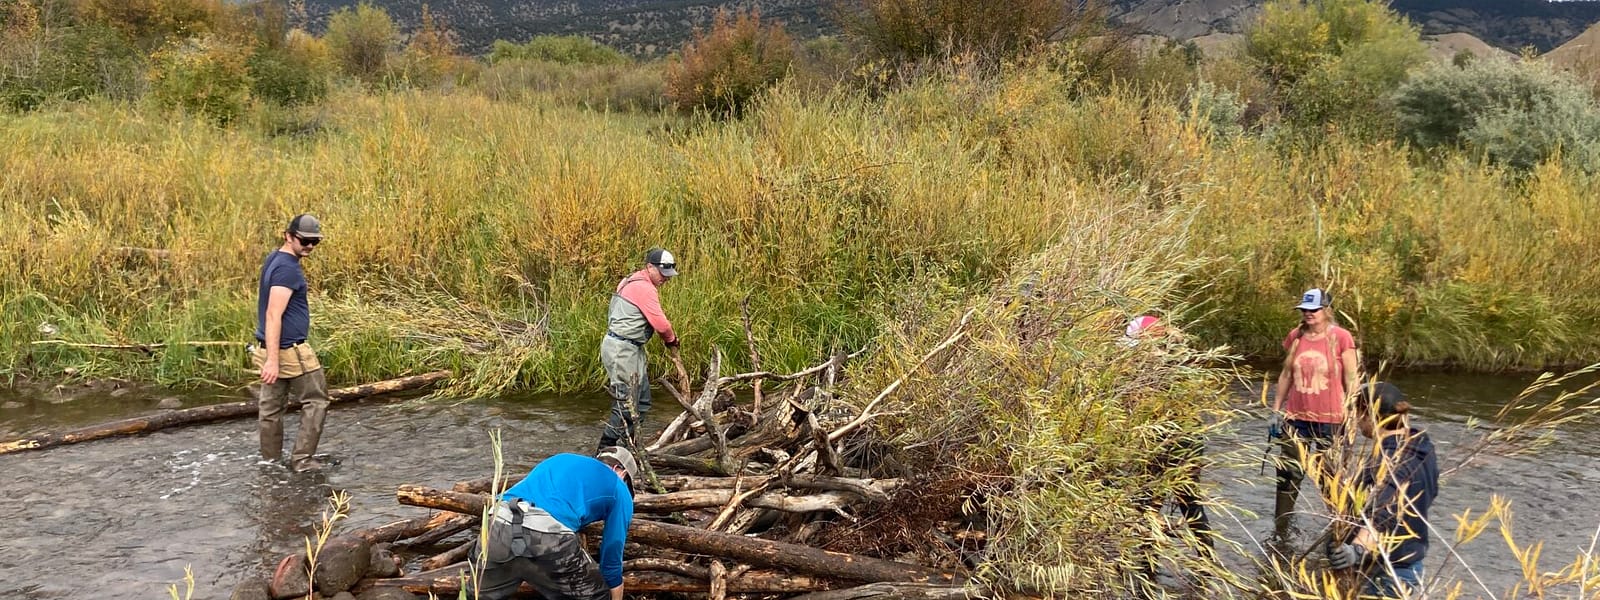 Volunteers work together to build low tech structure in creek